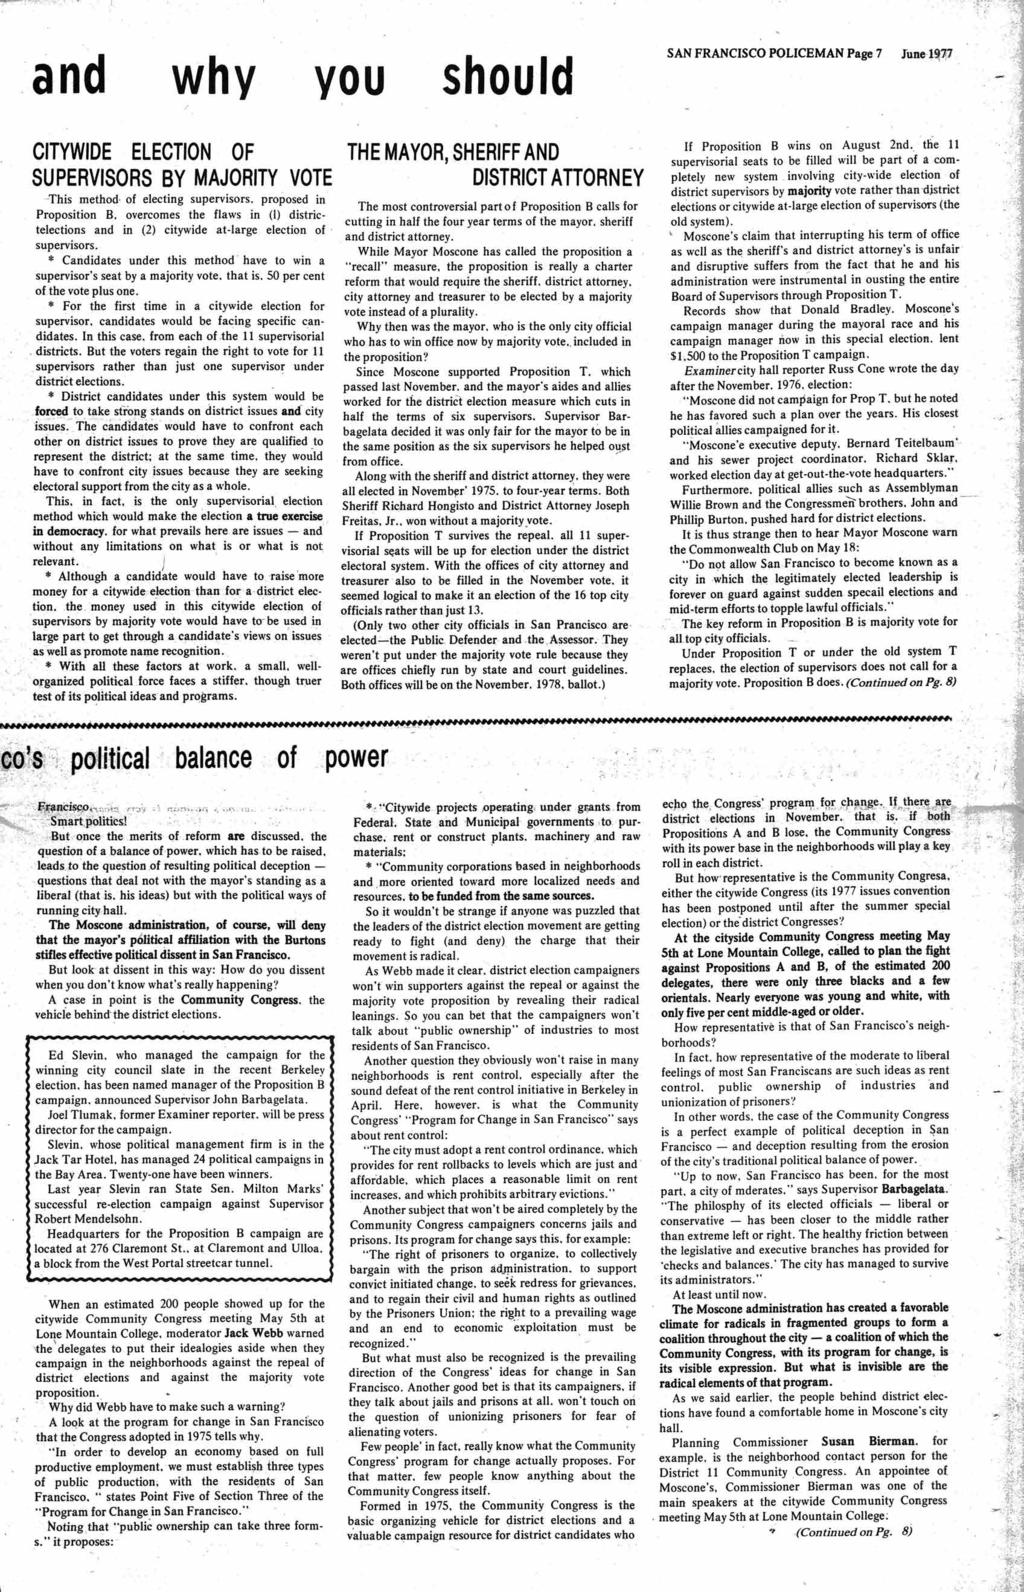 why you should SAN FRANCSCO POLCEMAN Page 7 June 197,7 CTYWDE ELECTON OF SUPERVSORS BY MAJORTY VOTE This method' of electing supervisors, proposed in Proposition B.